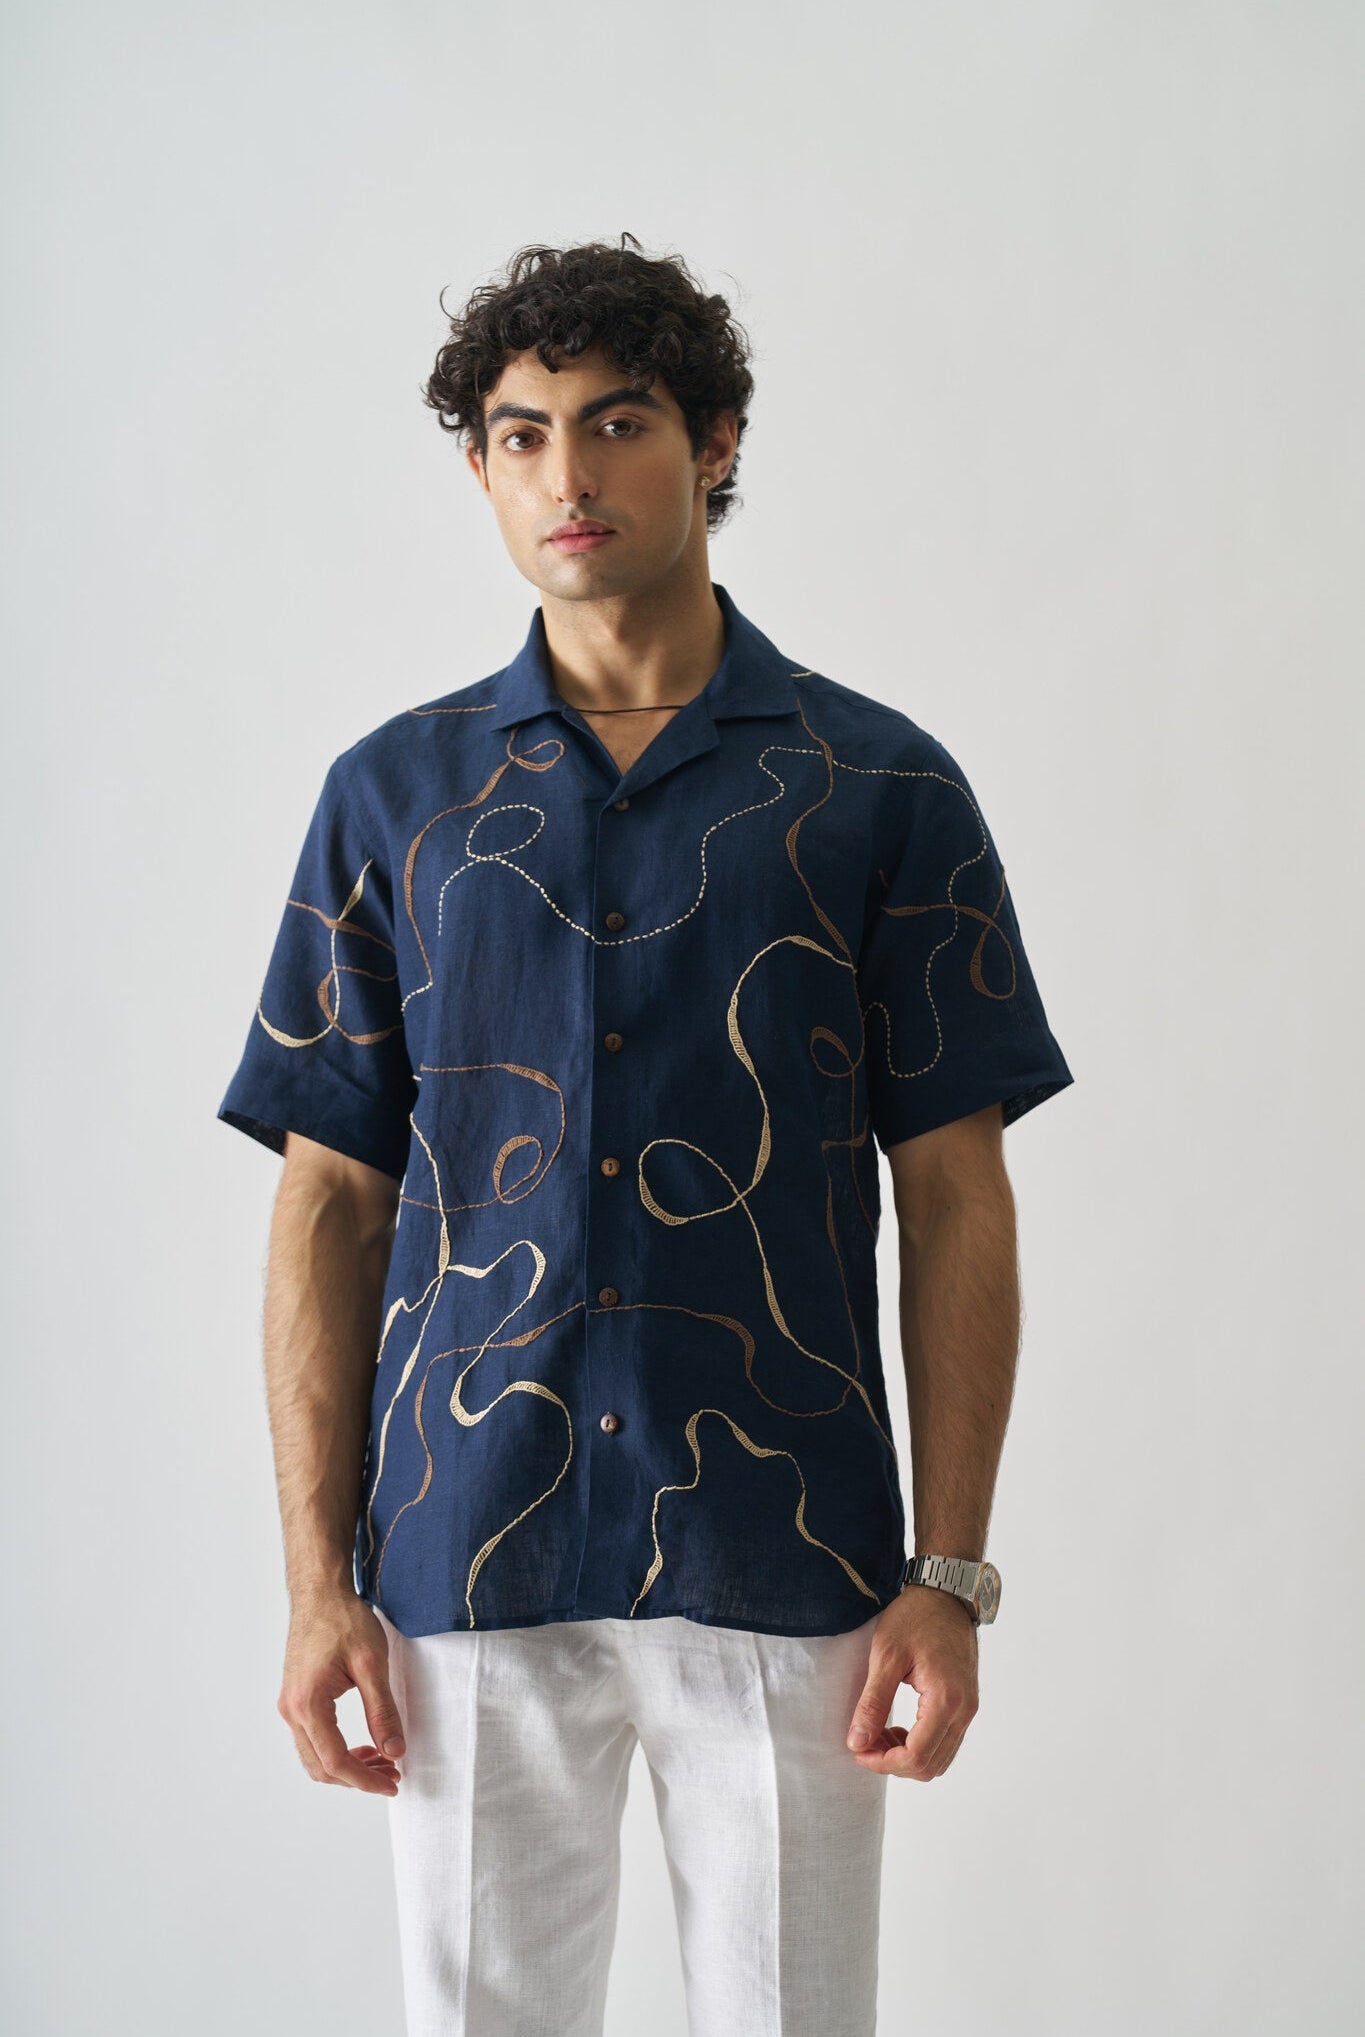 Mens Hand Embroidered Pure Linen Shirt - Imperial Accent - CiceroniShirtCultura Studio